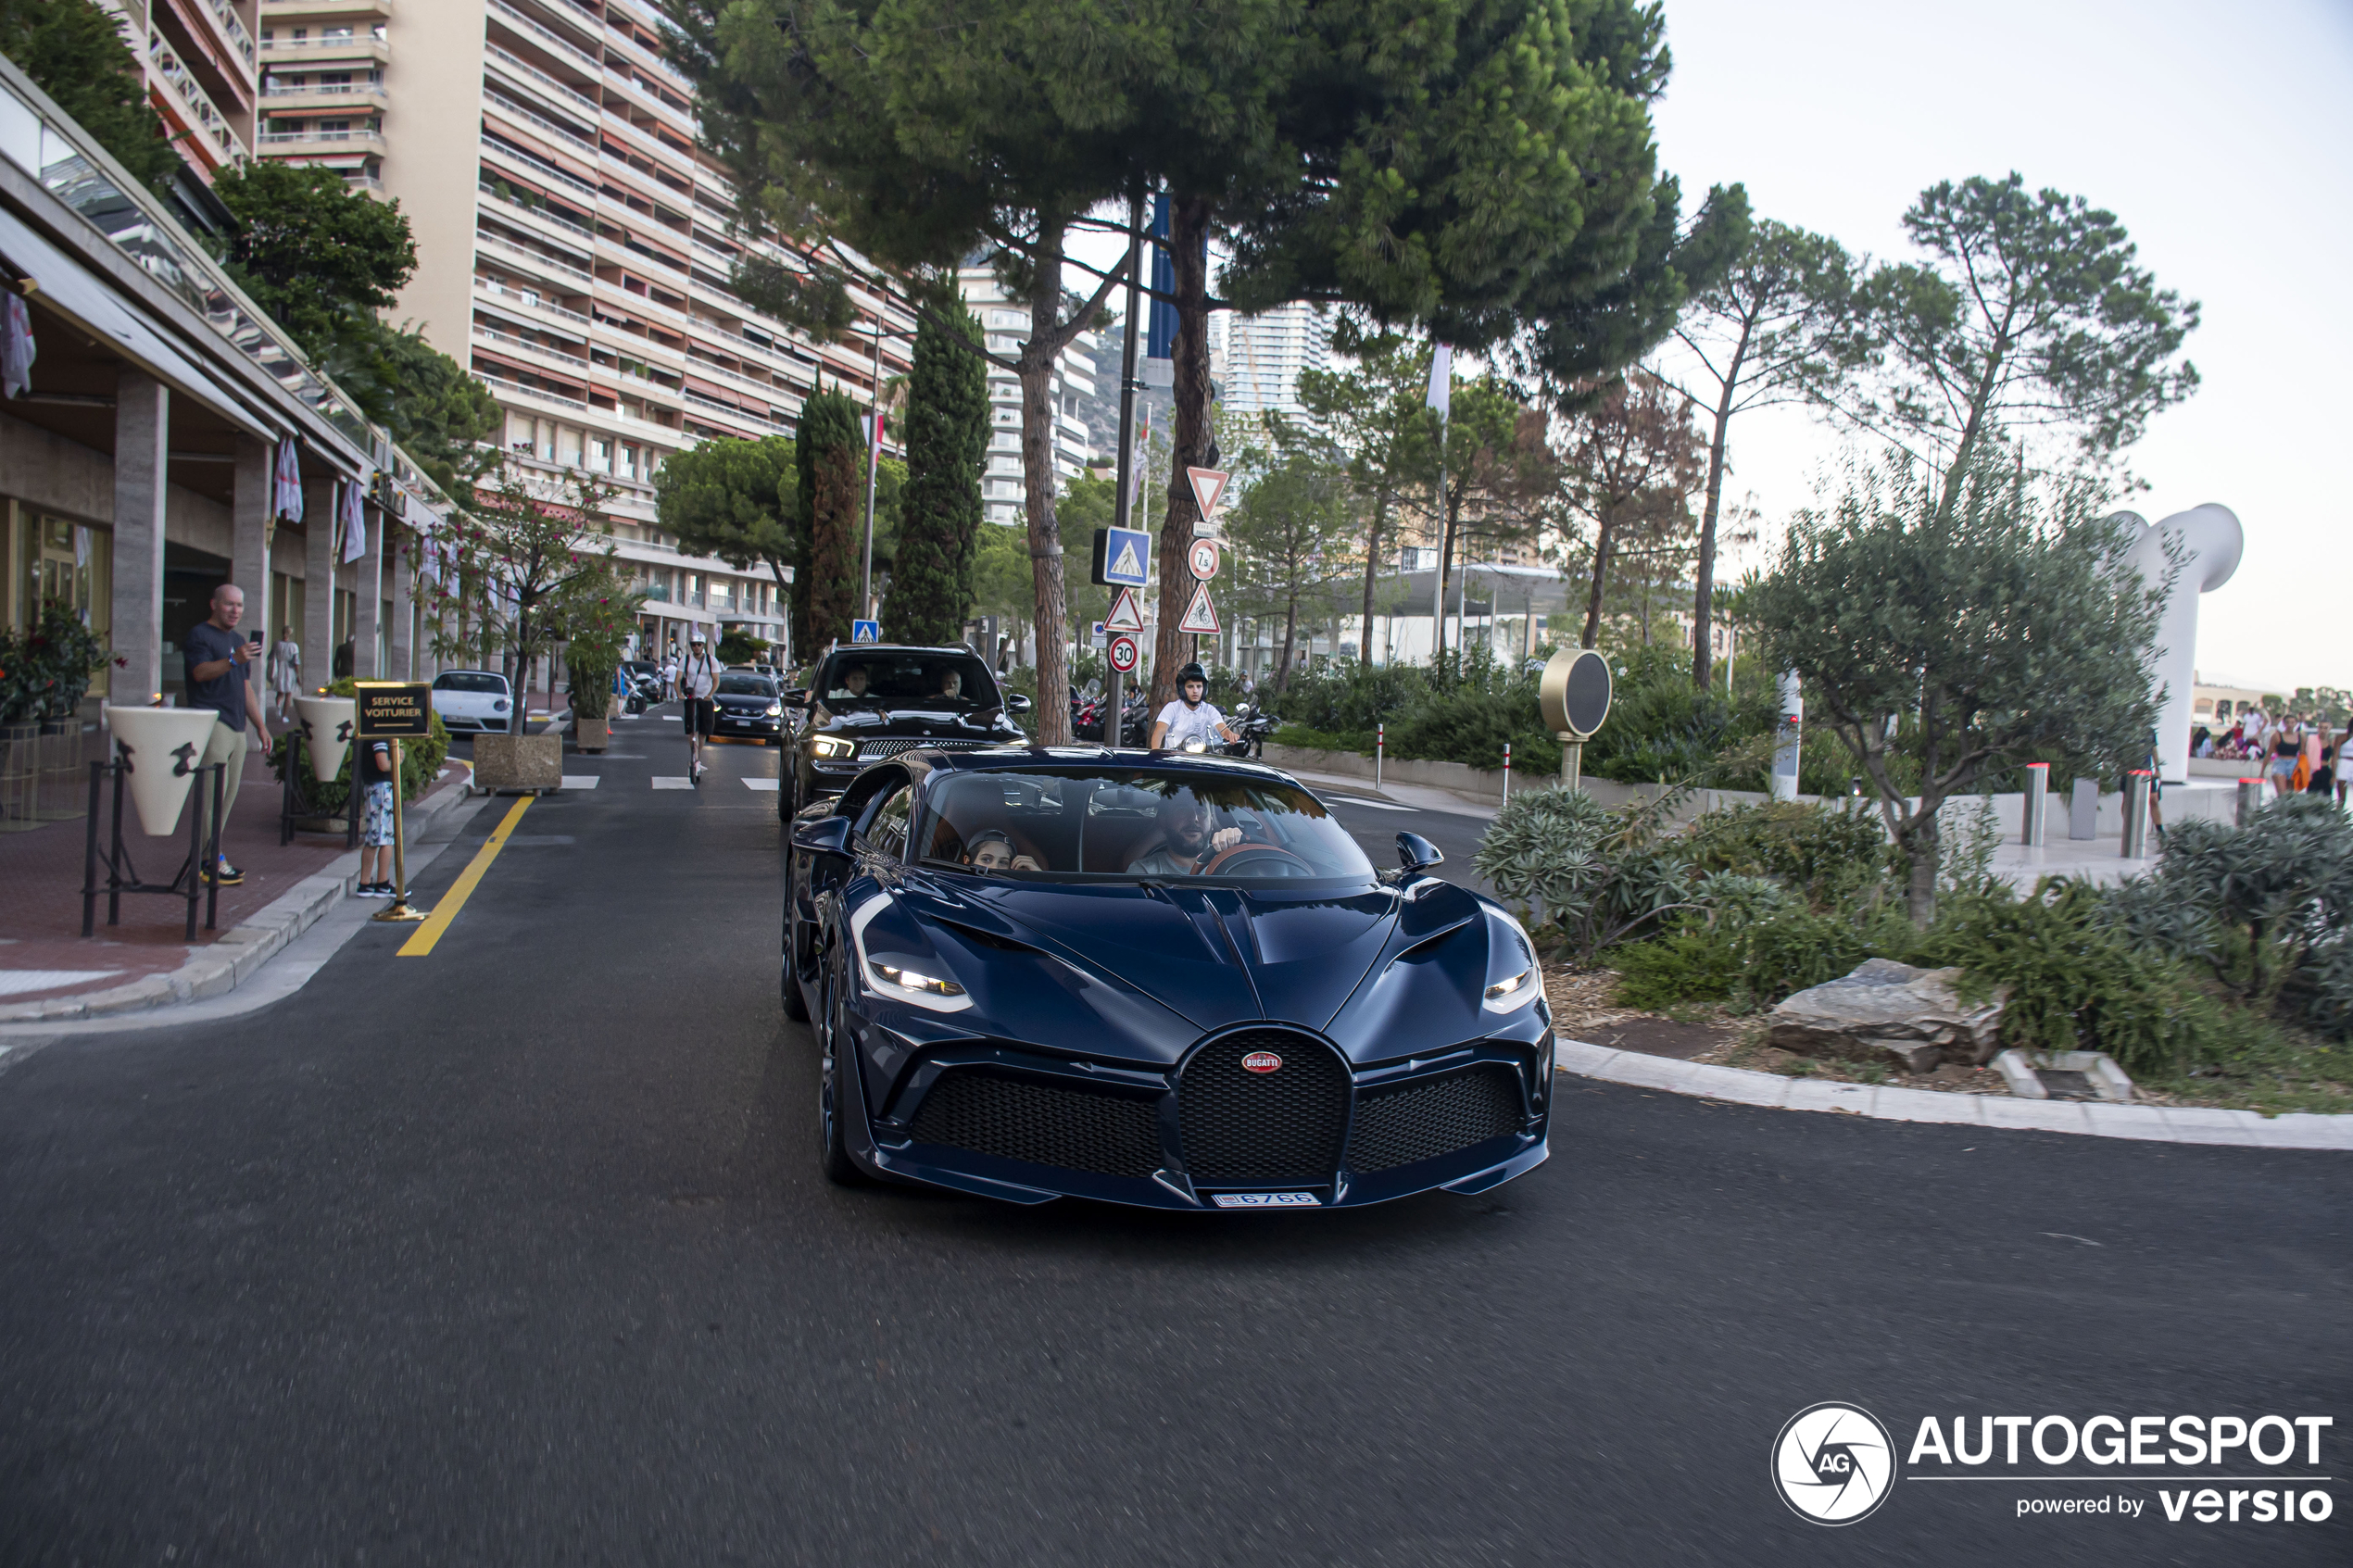 If you want to see a Bugatti Divo, you have to go to Monaco